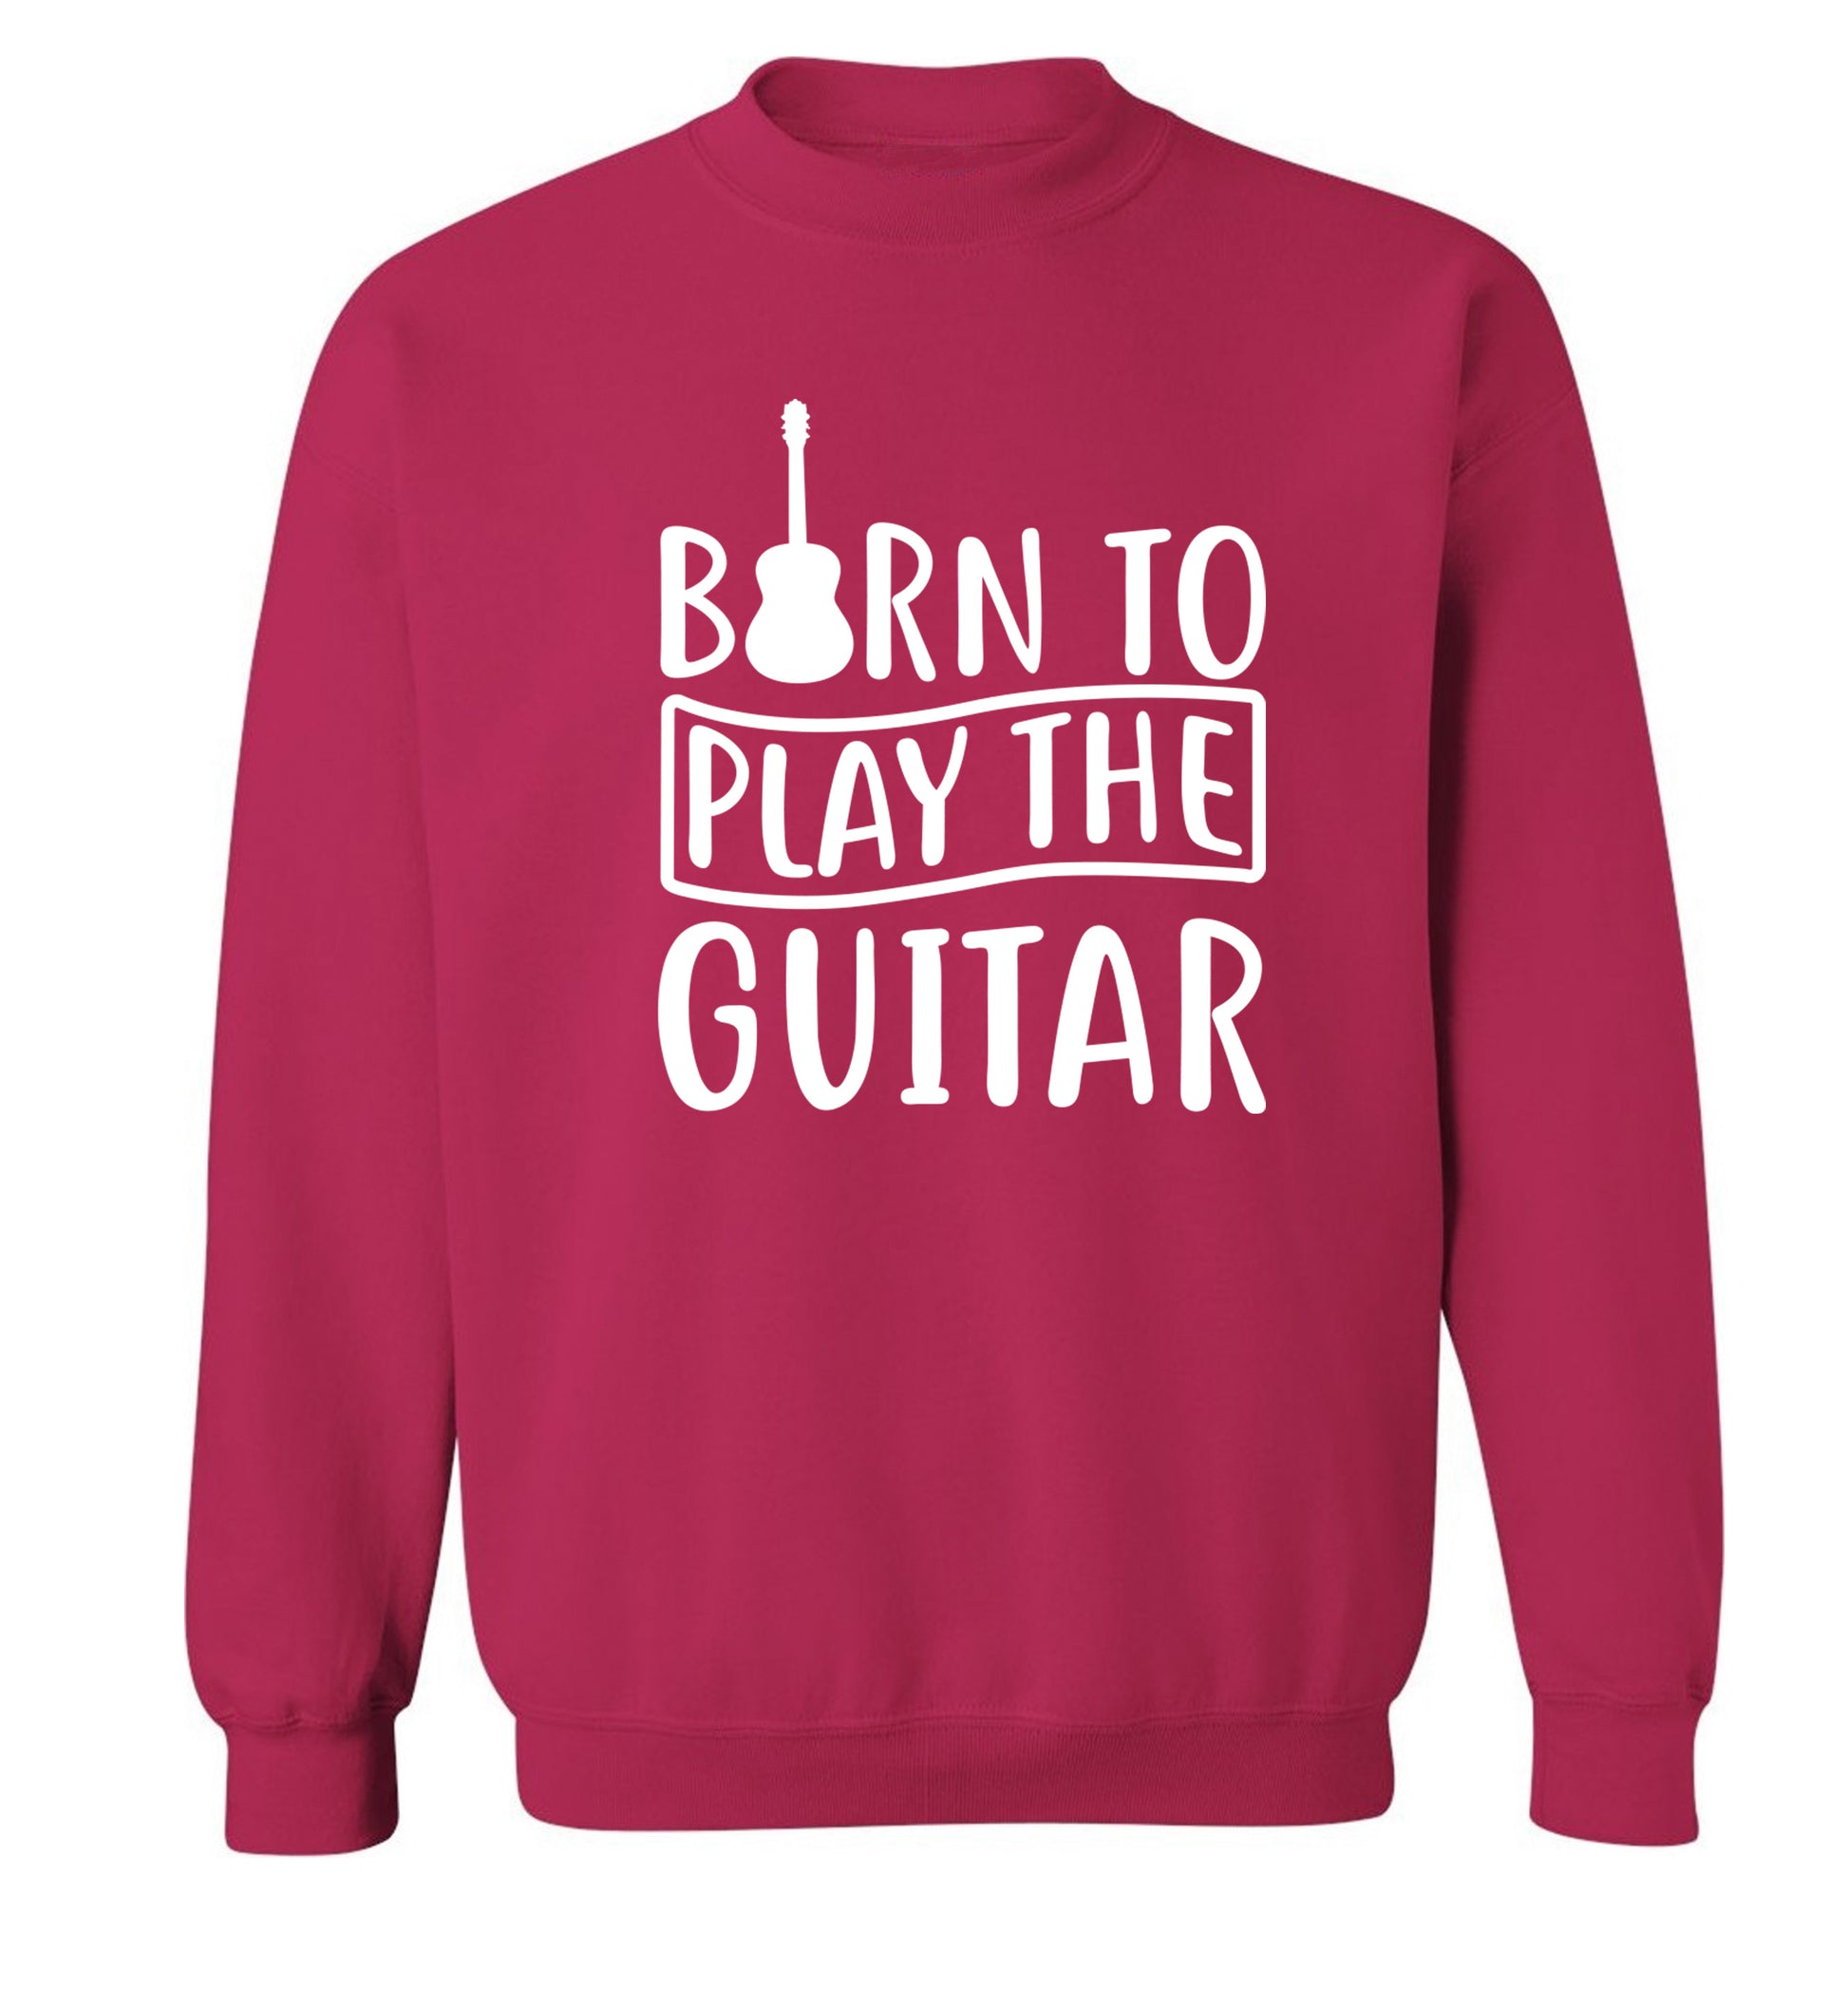 Born to play the guitar Adult's unisex pink Sweater 2XL